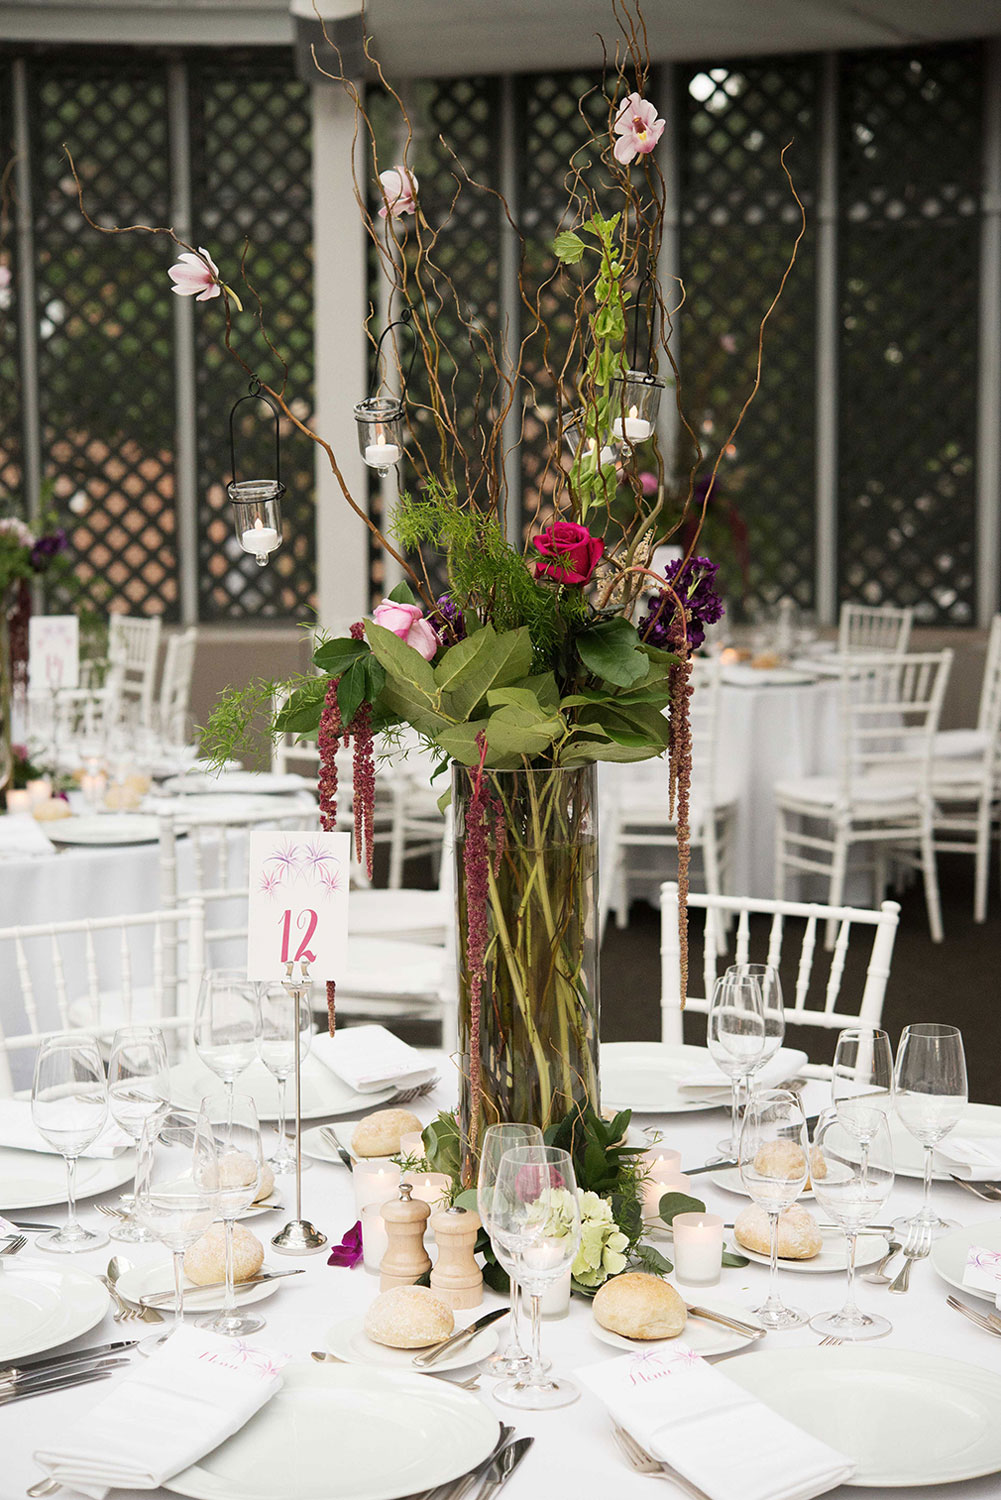 Tall wedding arrangements with Curly willow and hanging flowers with lanterns for a July wedding at the Brooklyn Botanic Garden